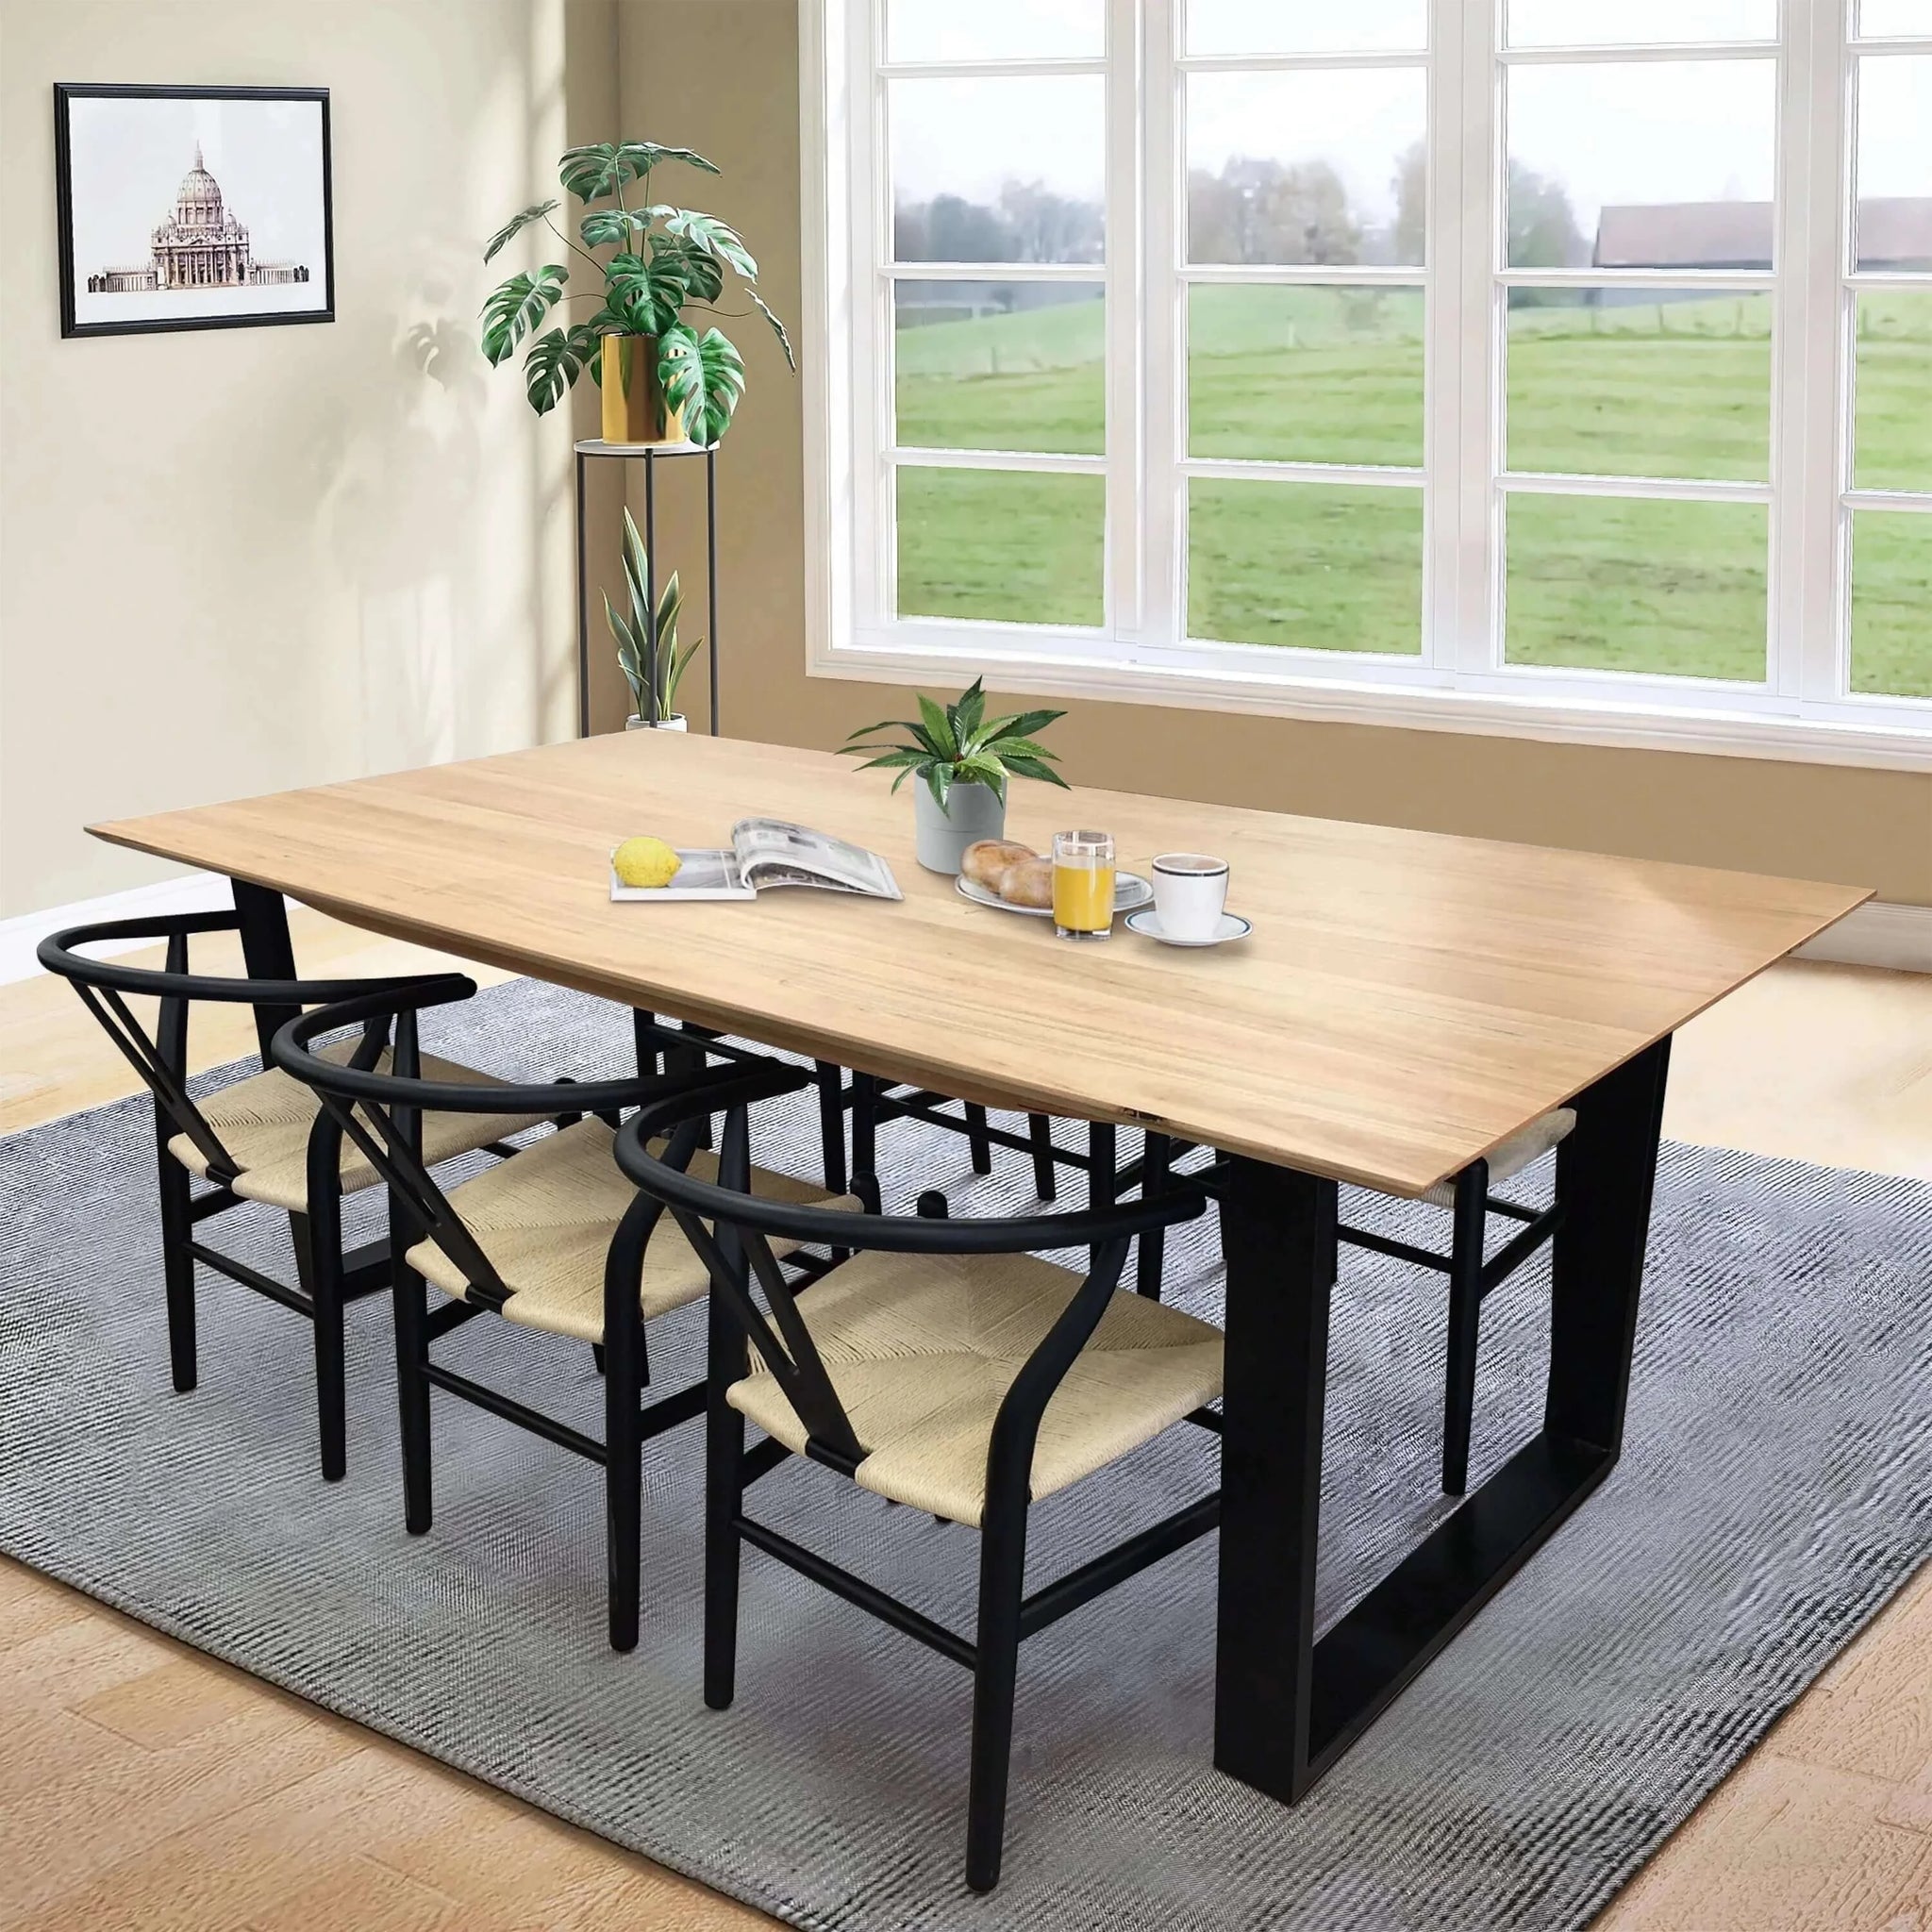 Buy aconite 7pc 180cm dining table set 6 wishbone chair solid messmate timber wood - upinteriors-Upinteriors